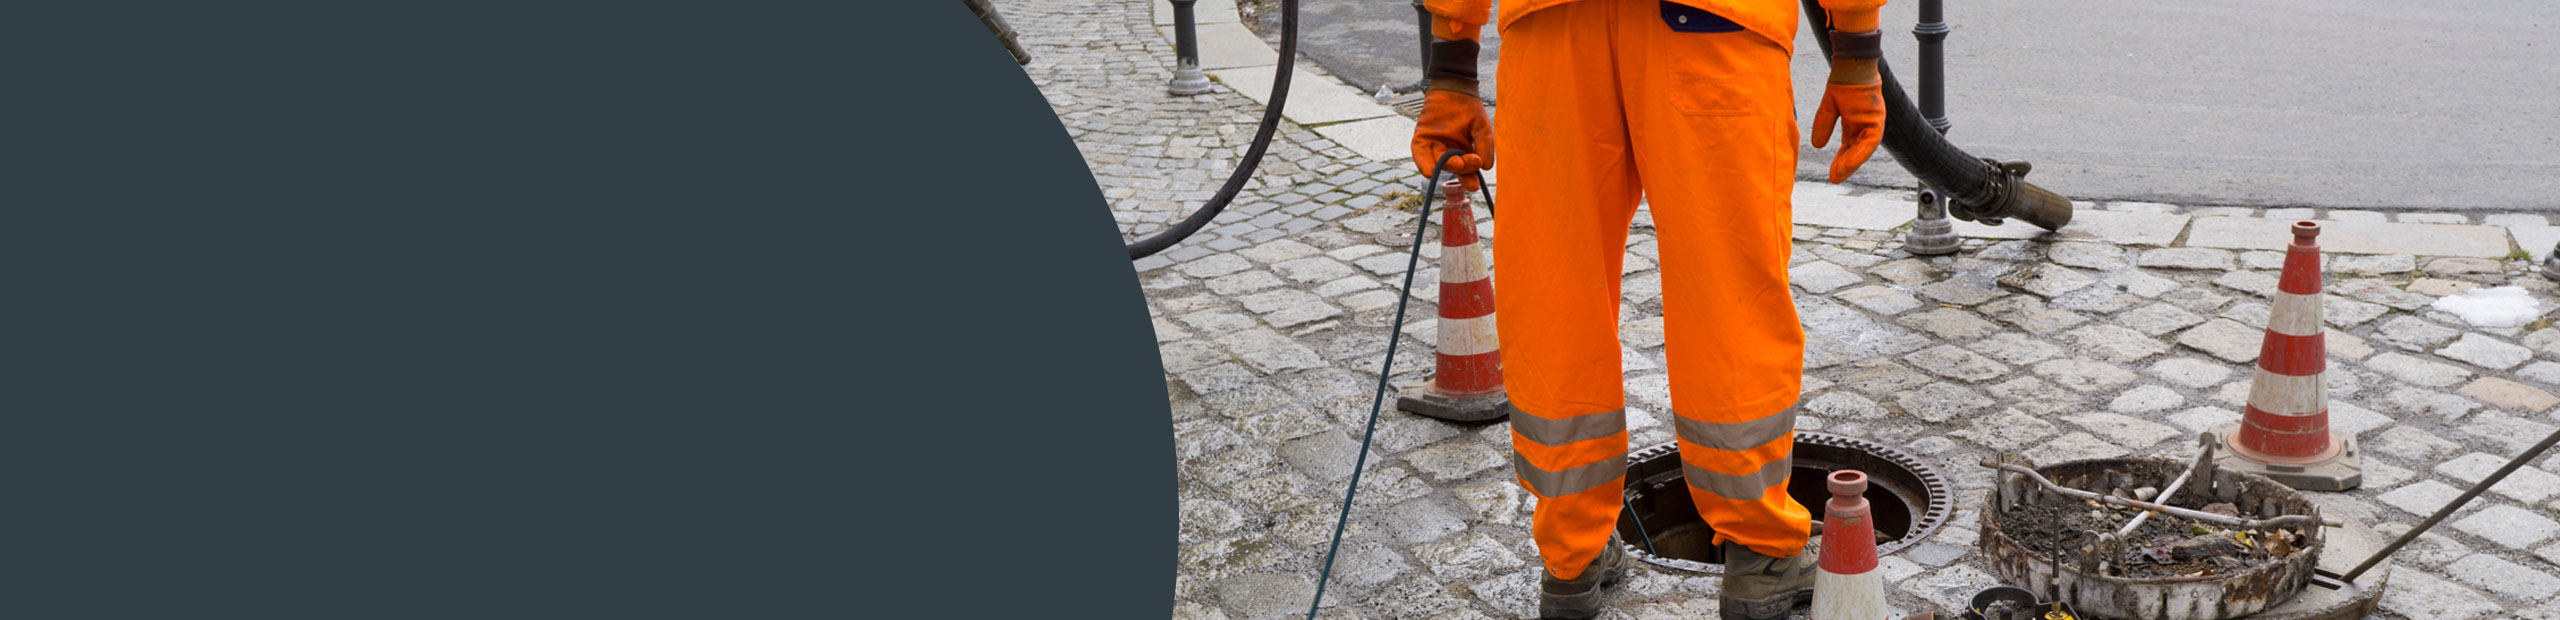 Sewage Cleaning Company - Camden